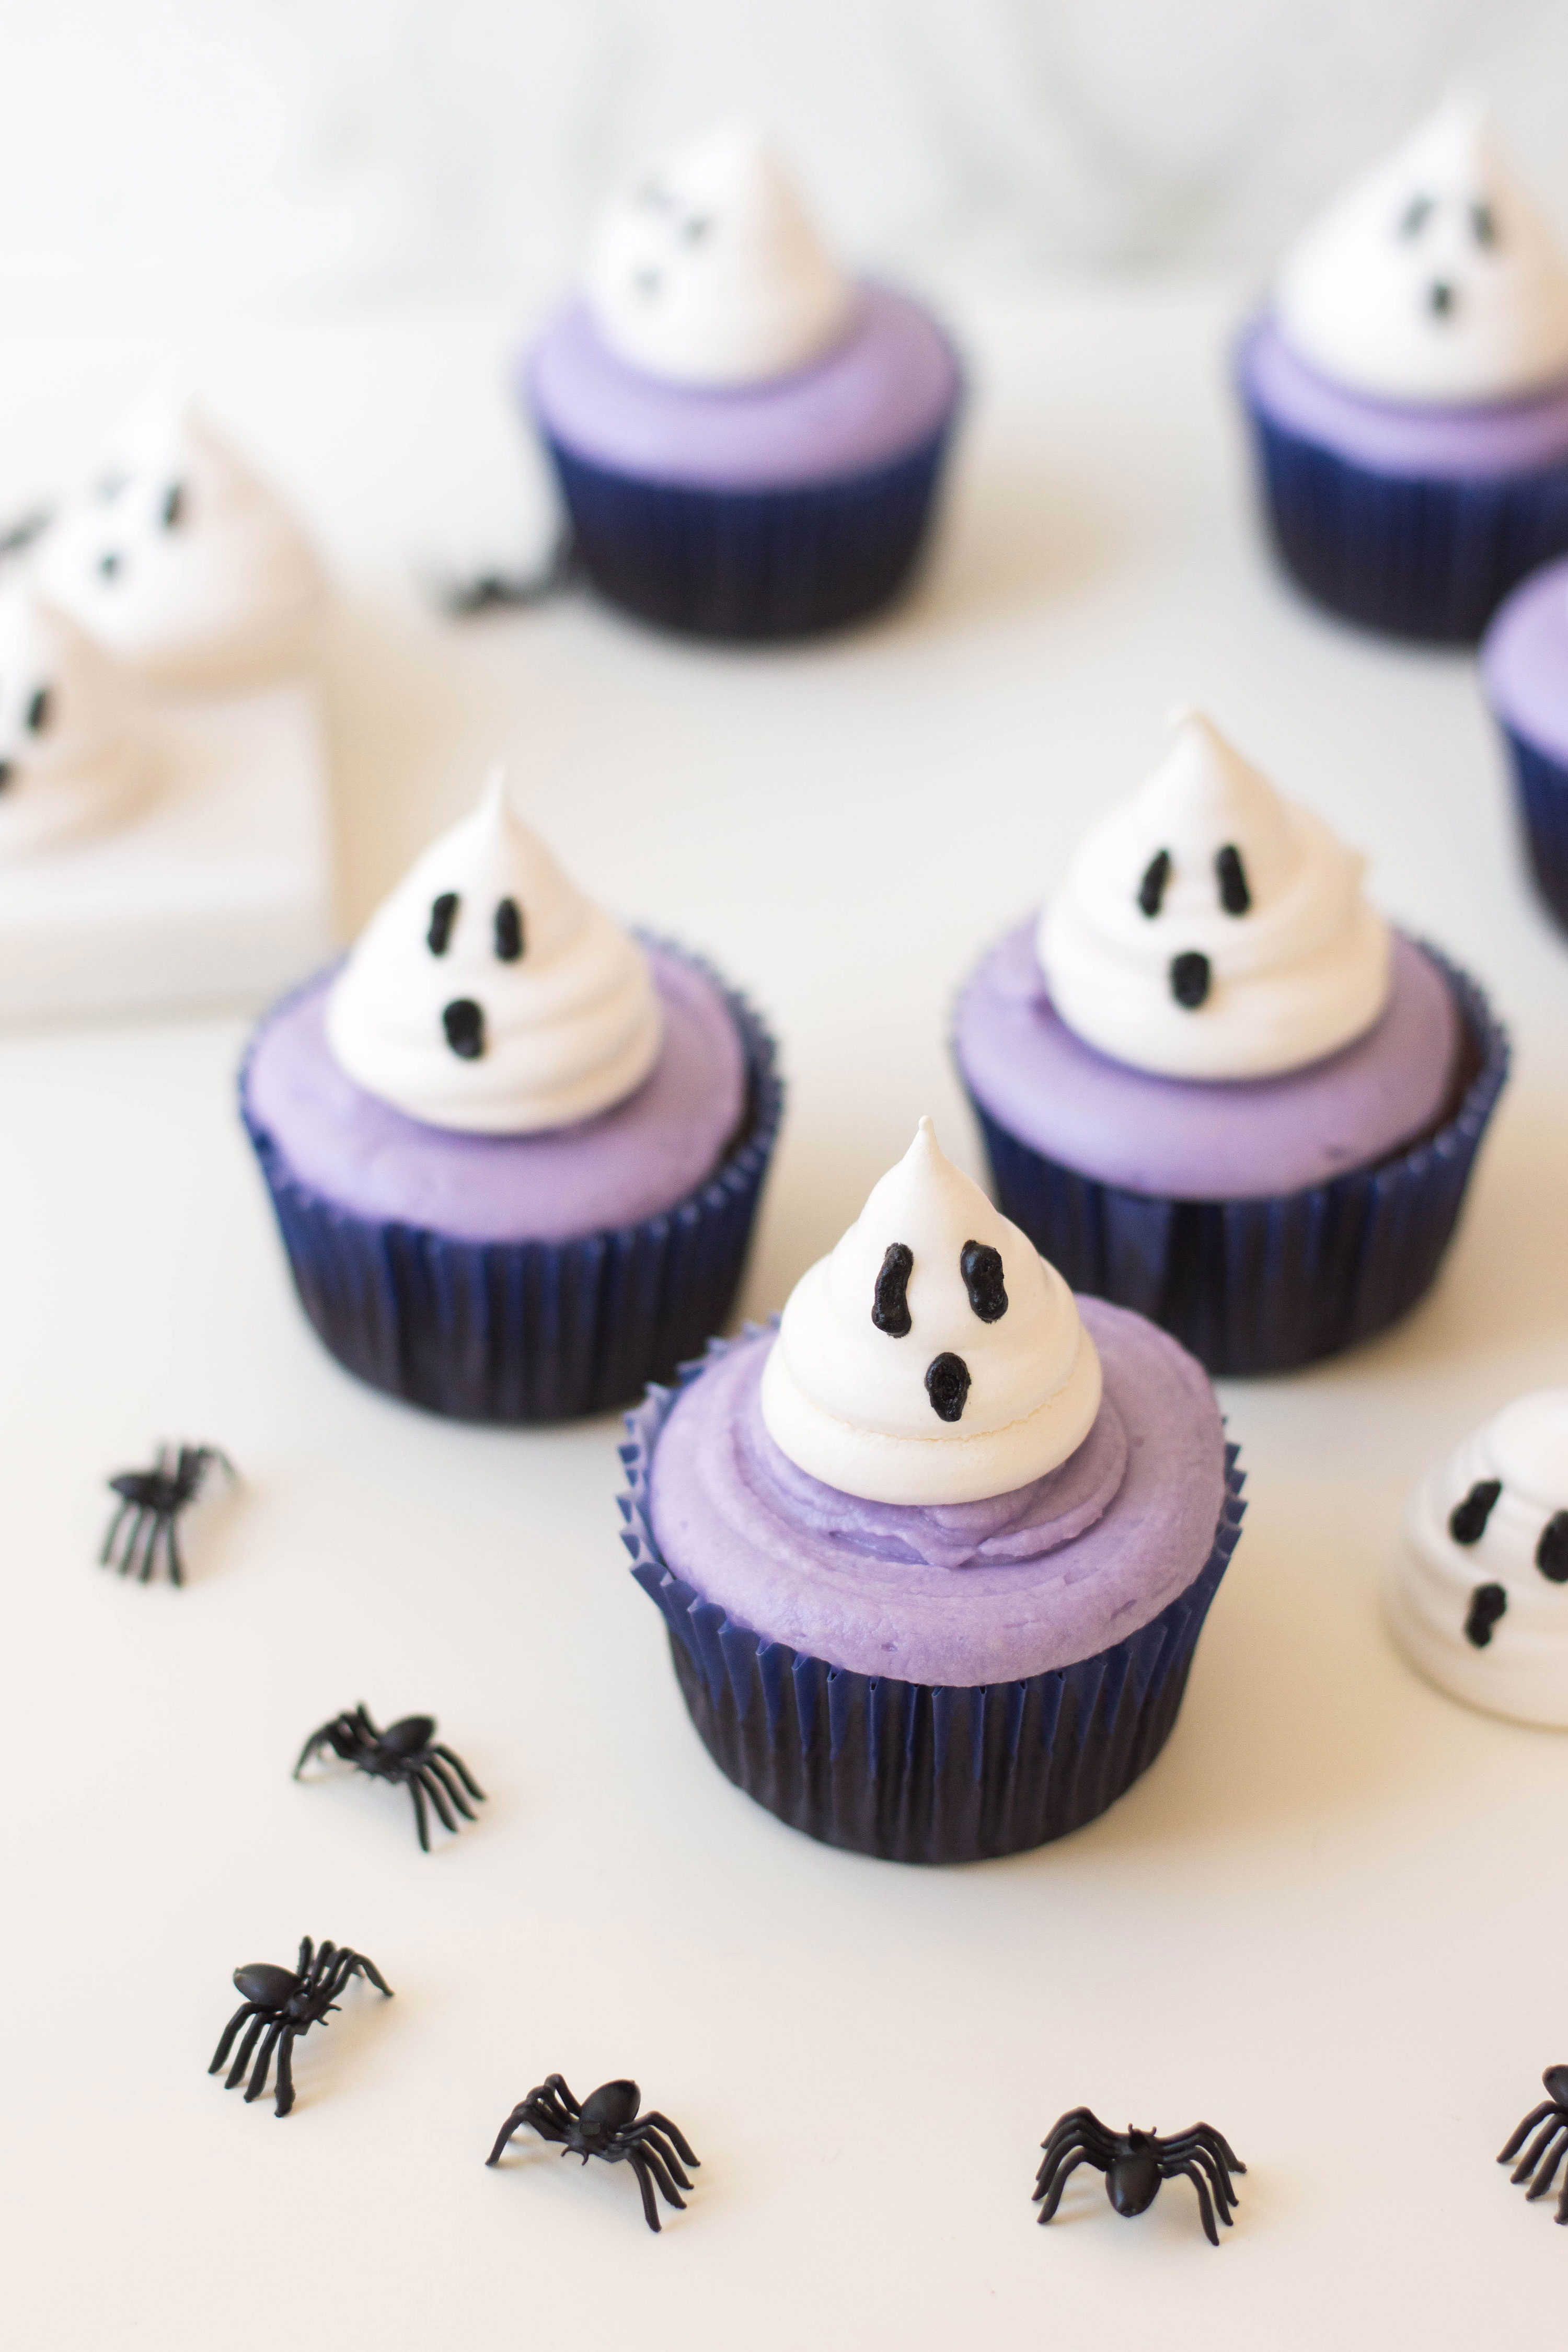 Meringue cookies take a new twist with these delicious (and oh-so adorable) Ghost Cupcakes. They're perfect for Halloween because their ghoulish AND sweet! #halloweencupcakes